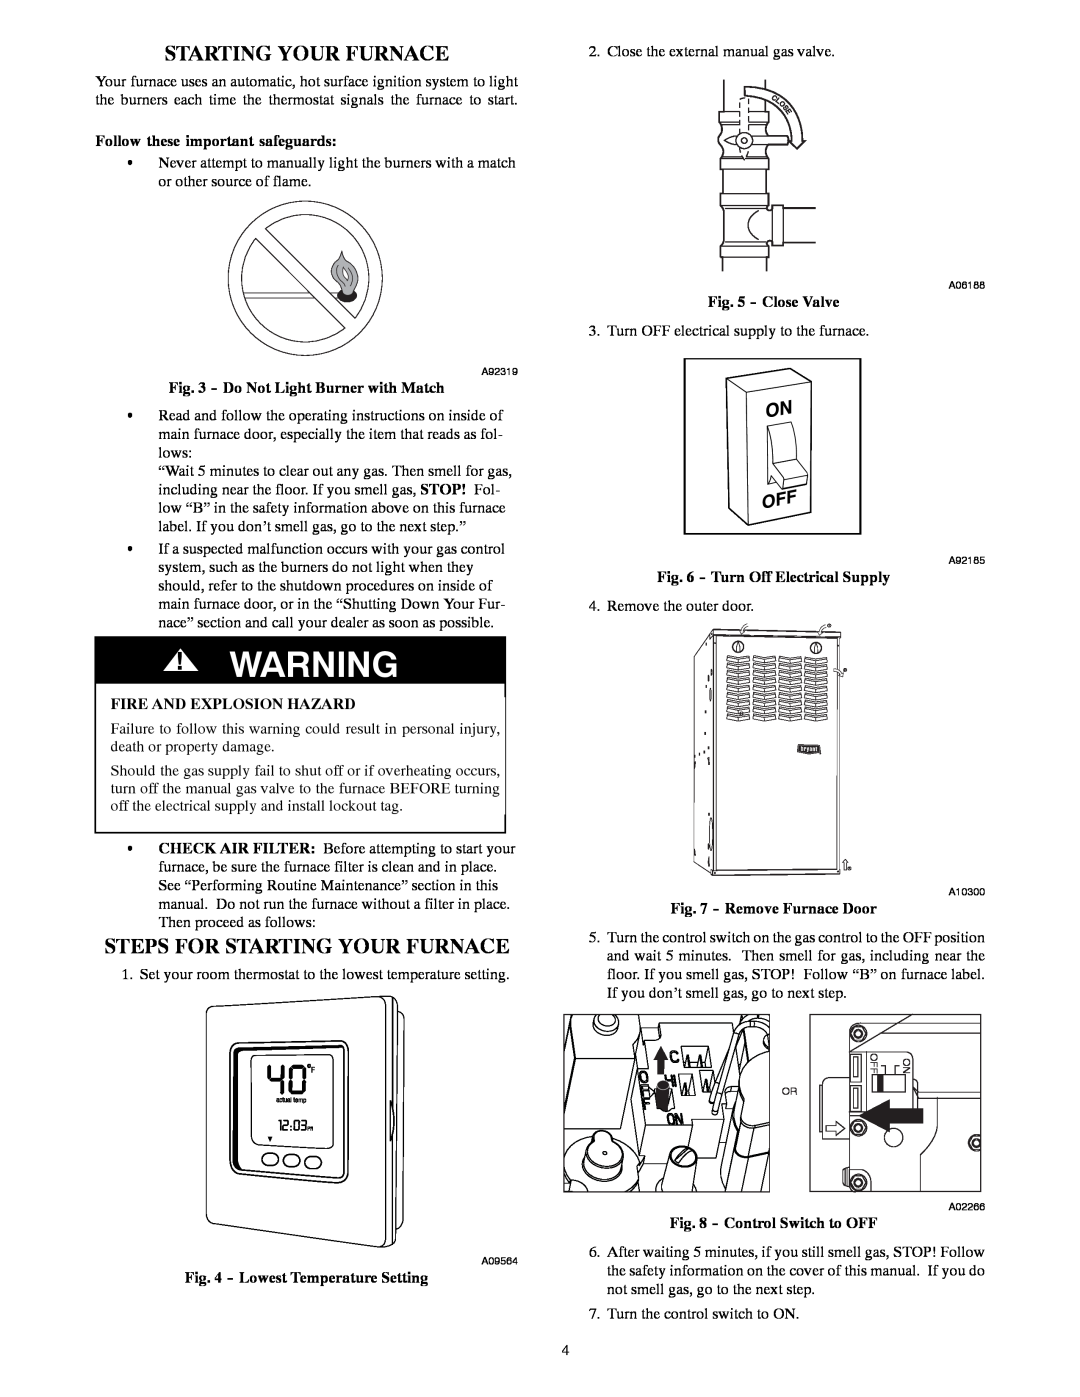 Bryant A10252 Steps For Starting Your Furnace, Follow these important safeguards, Do Not Light Burner with Match 